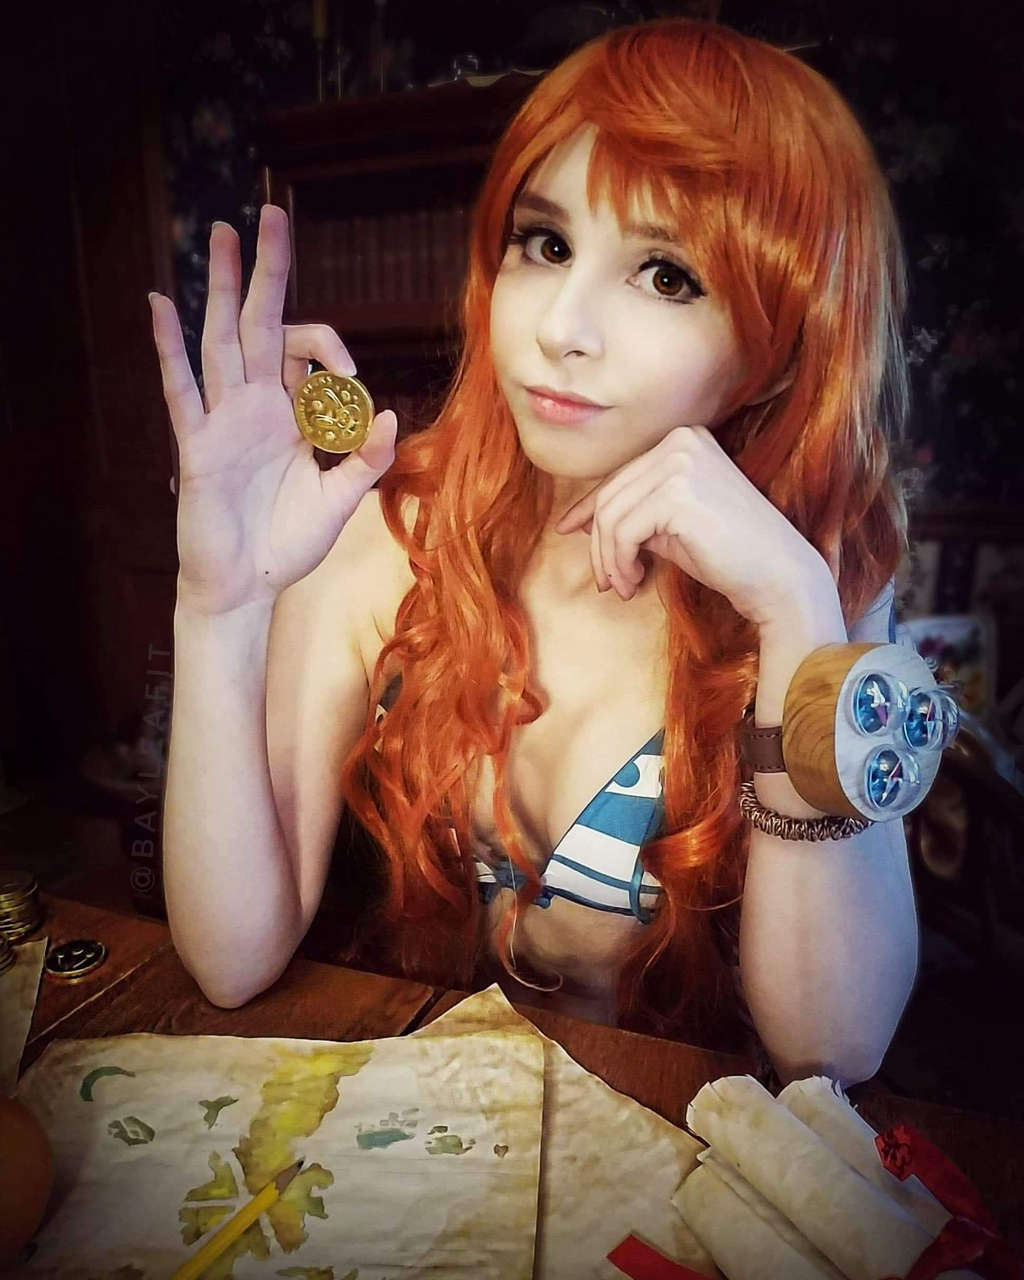 My Friend As Nami From One Piece Drop Her A Vote If You Enjoy Her Cosplay